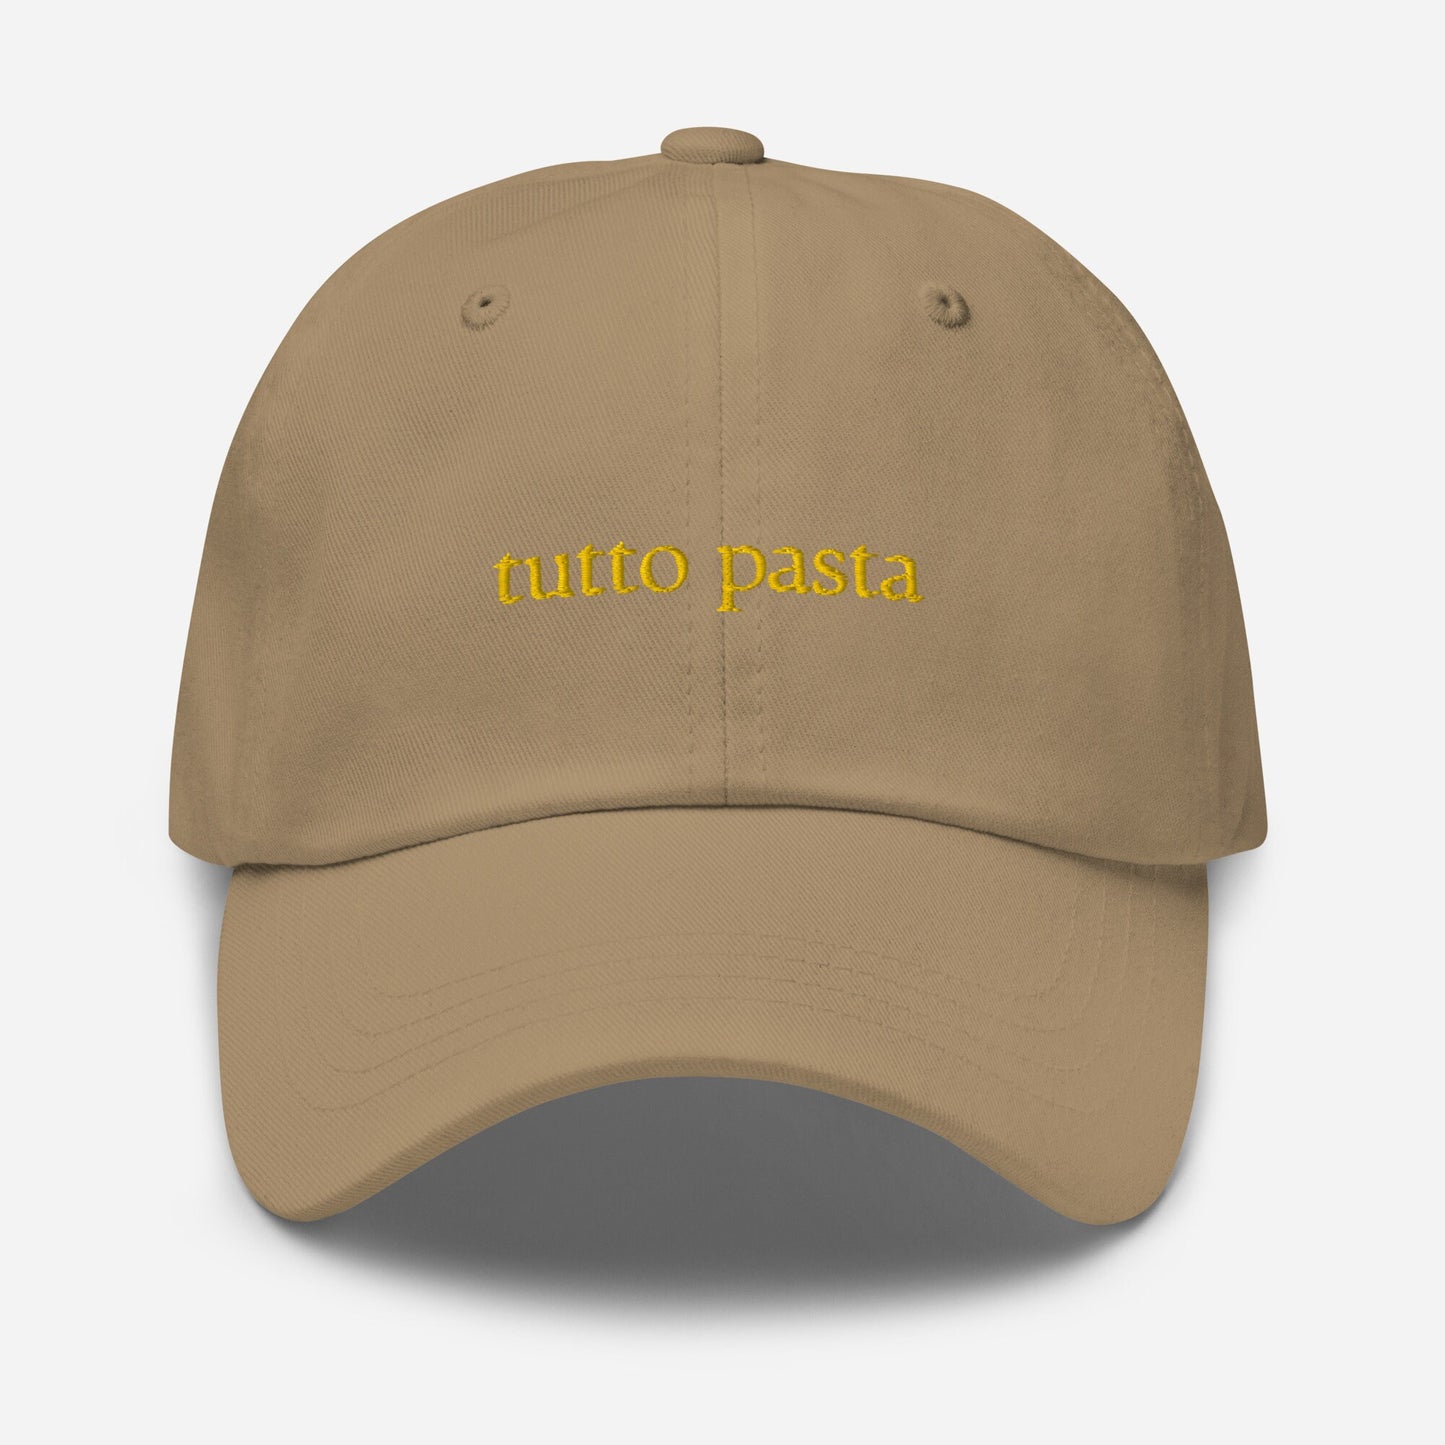 Tutto Pasta Dad hat - Gift italian food lovers - Multiple Colors - Cotton Embroidered Cap